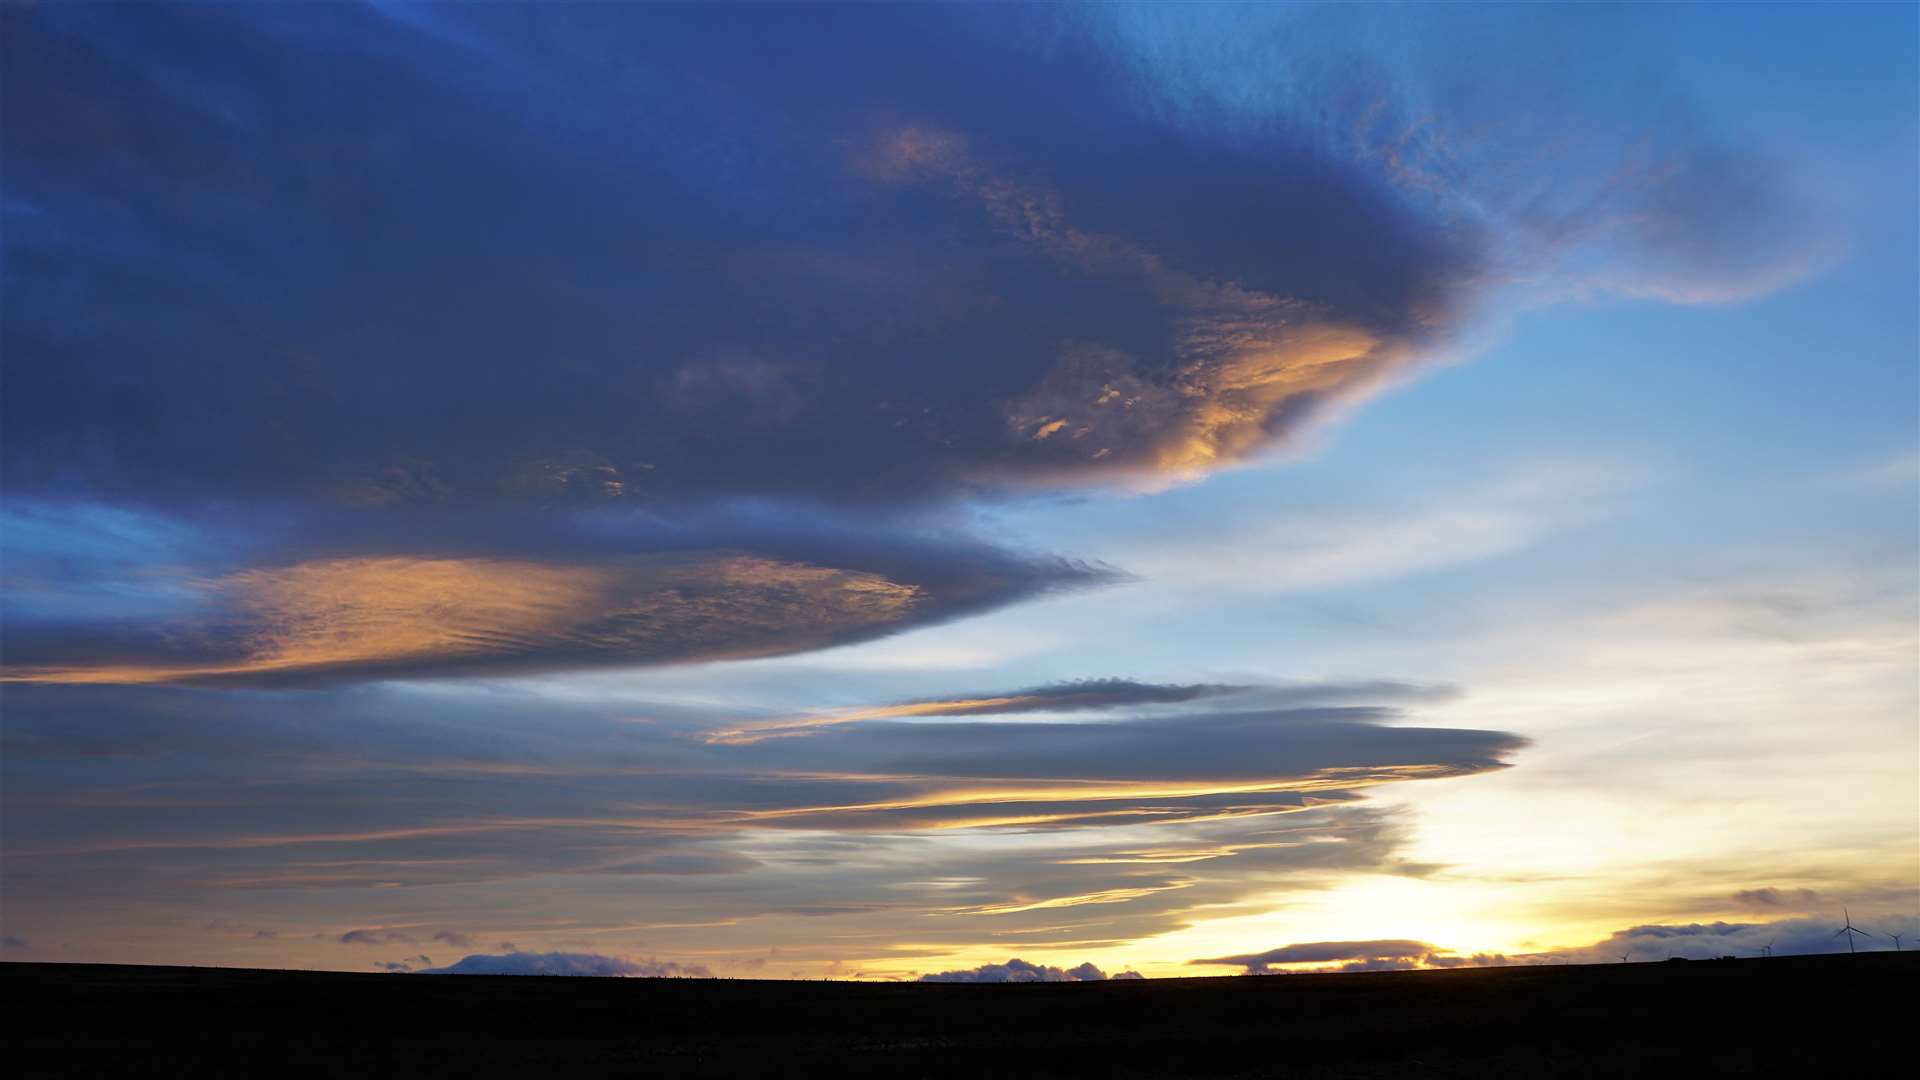 Similar skies were seen across the Highlands yesterday afternoon with dramatic lenticular cloud formations. Pictures: DGS